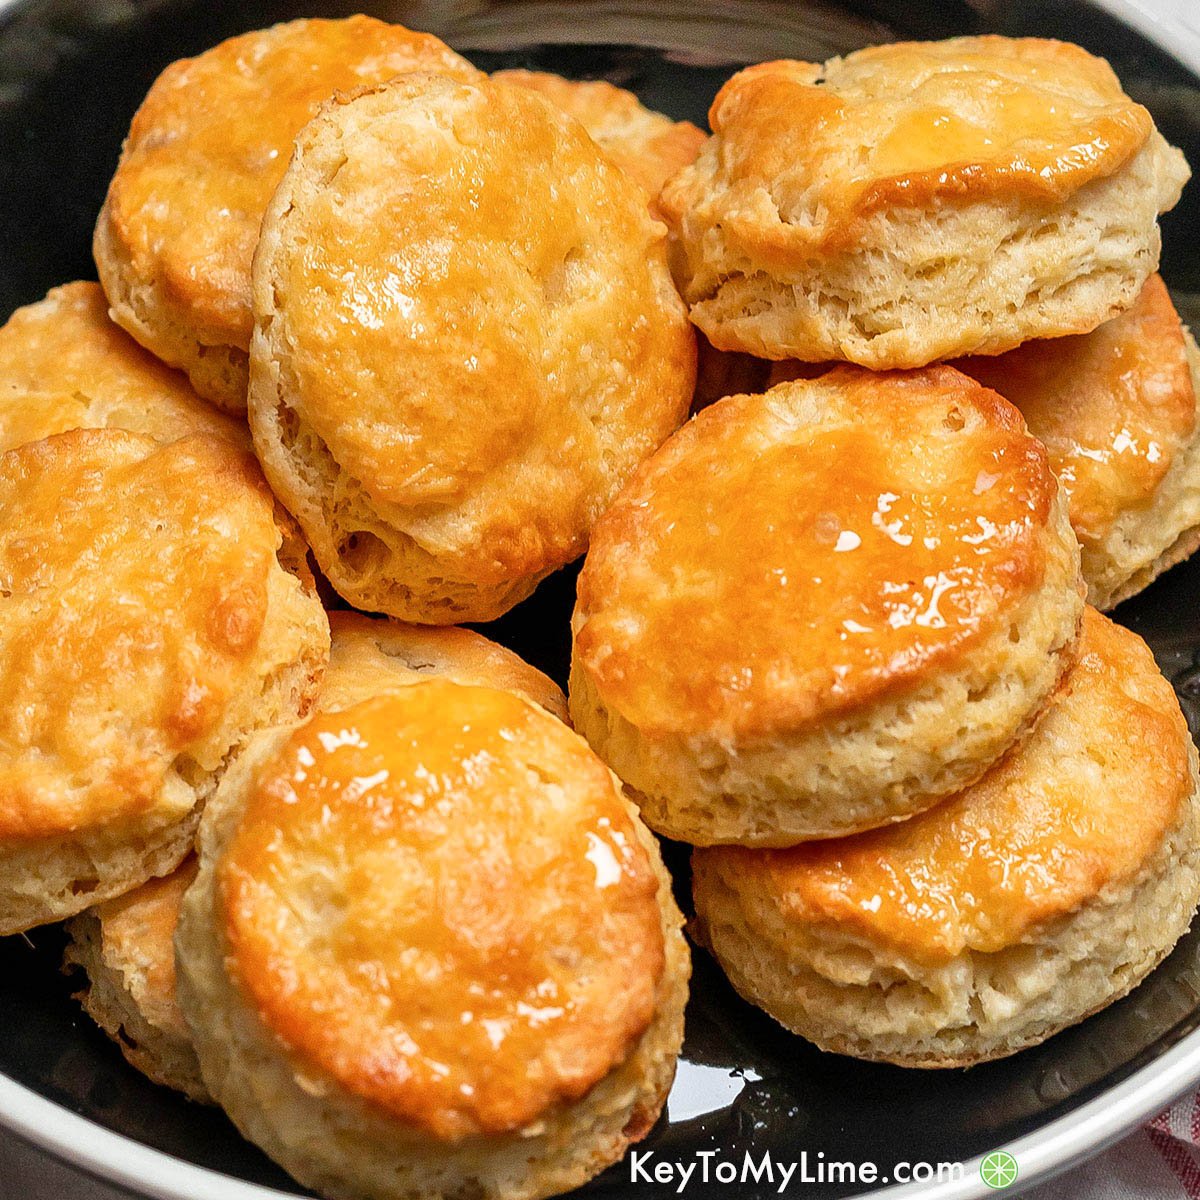 The best popeyes biscuits recipe.